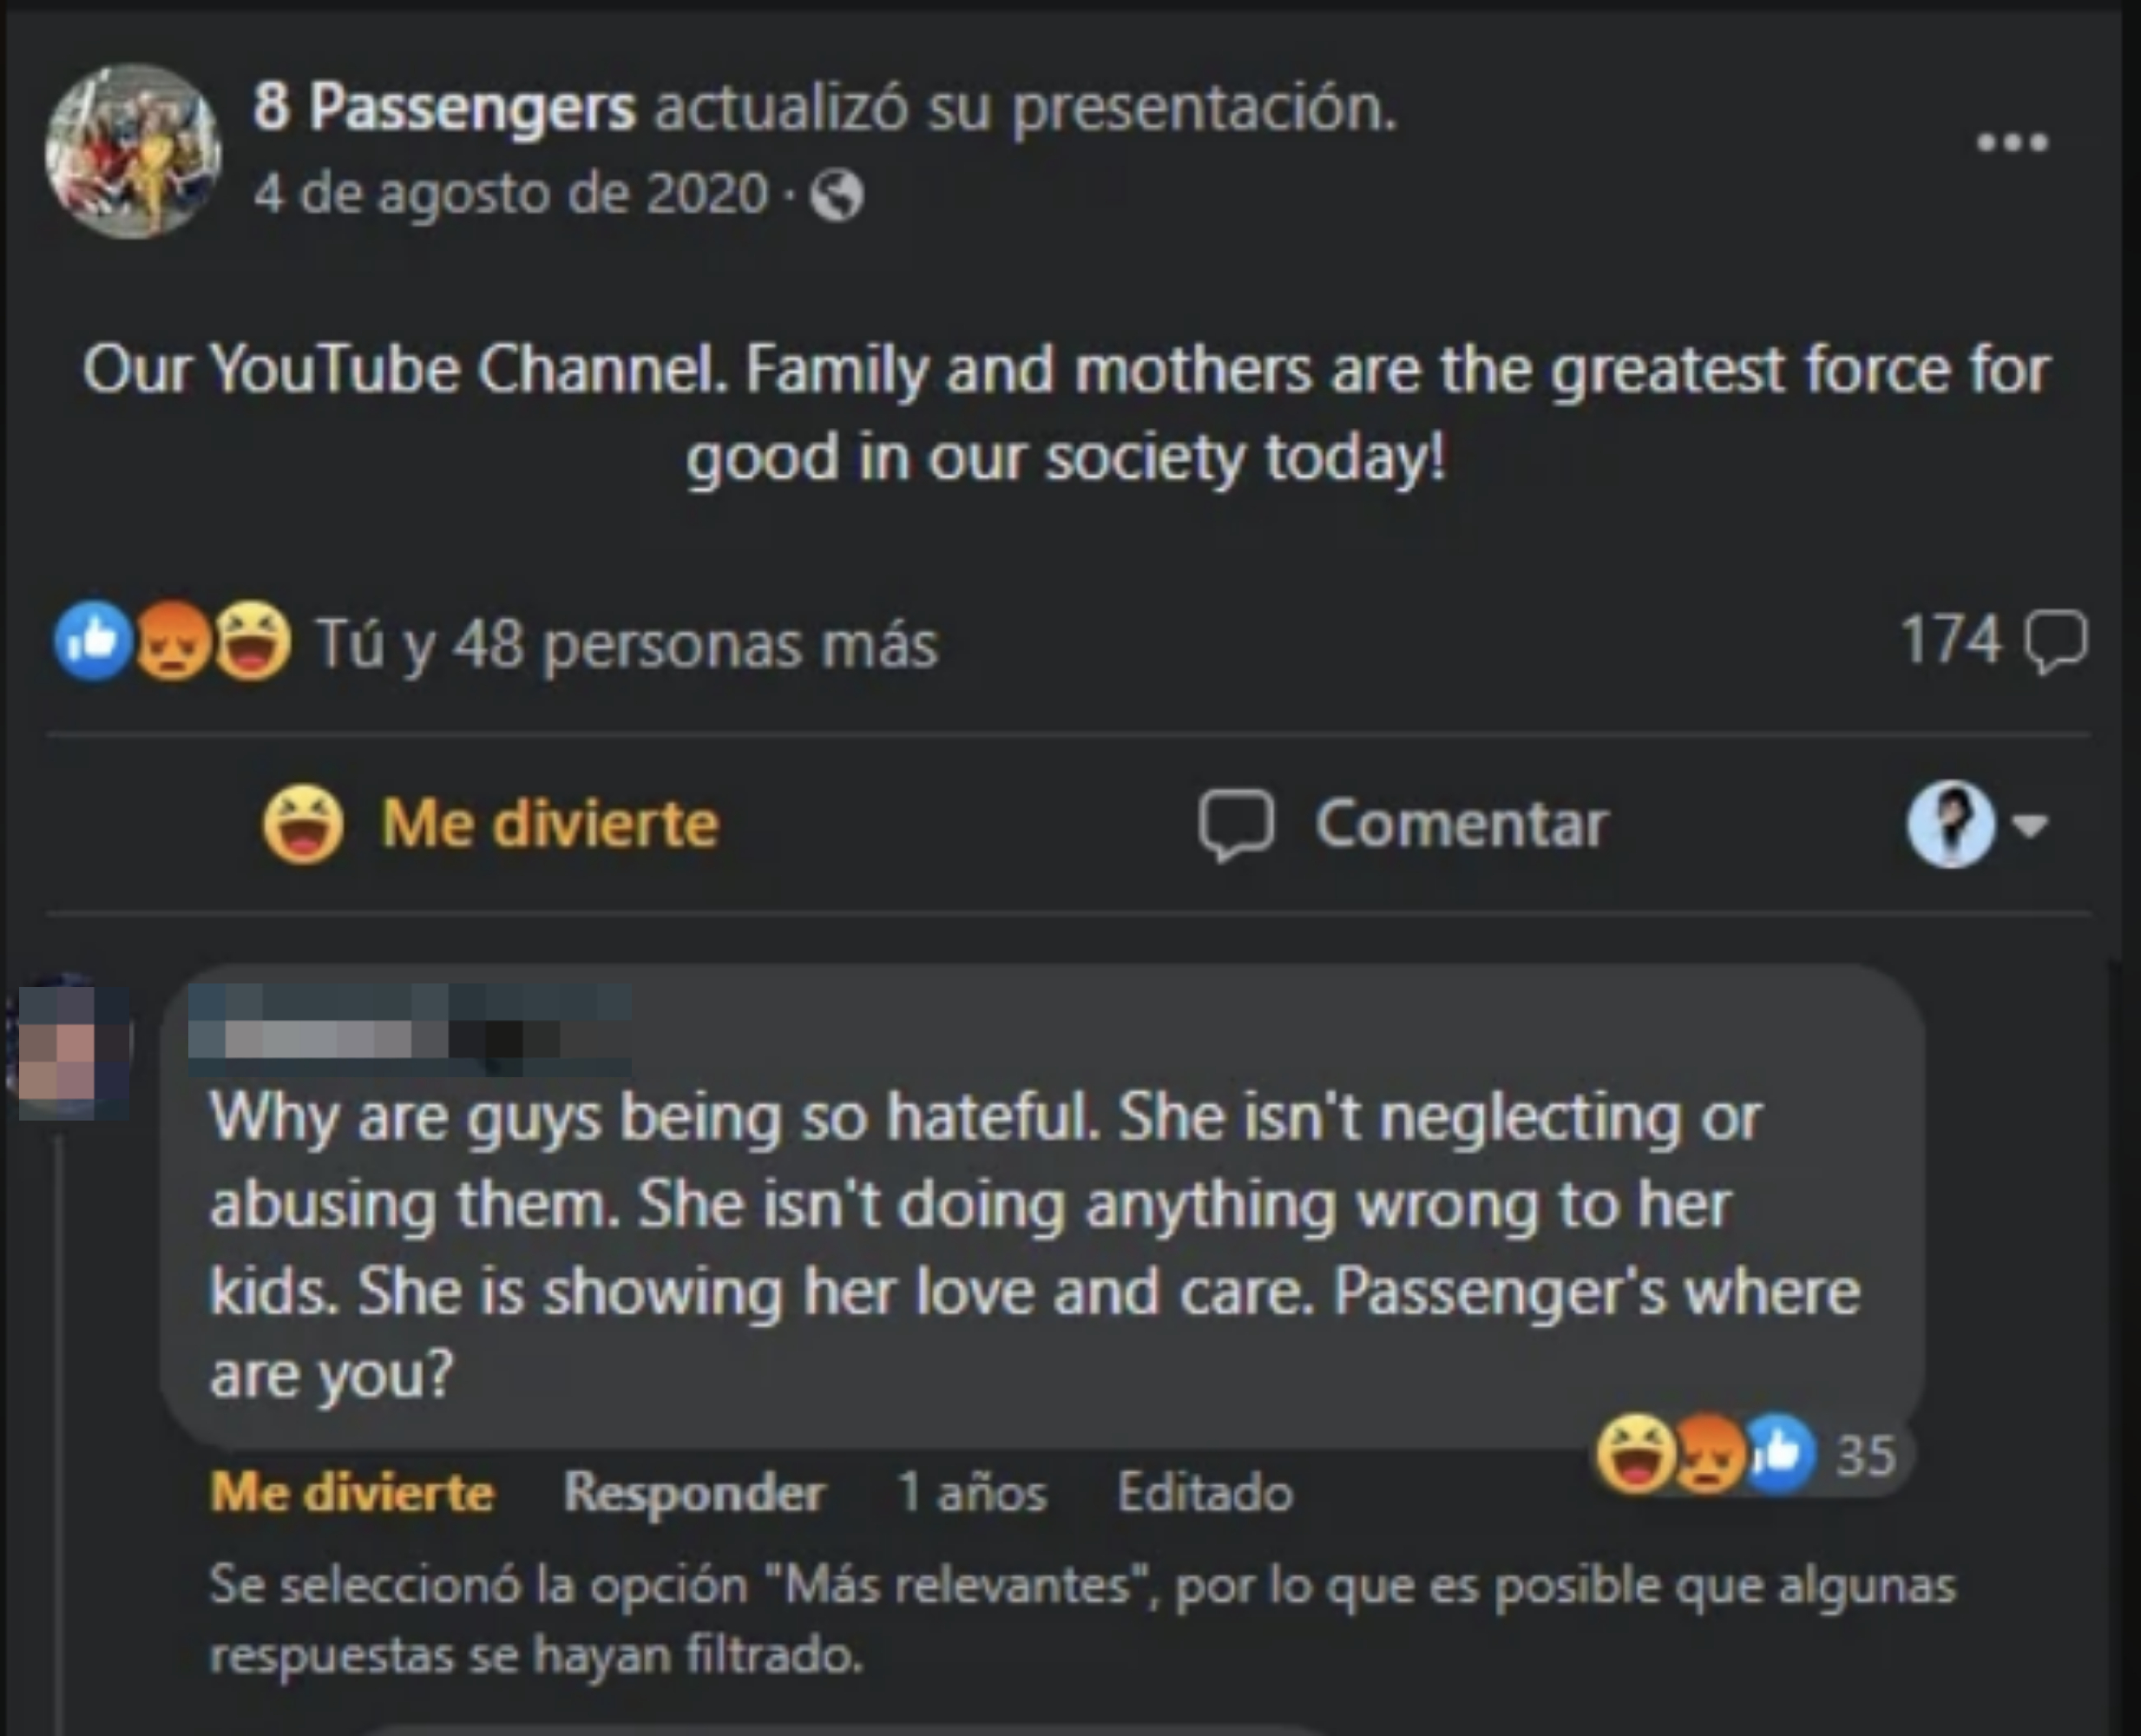 A screenshot of social media comments where users discuss a presenter&#x27;s family values, with mixed sentiments